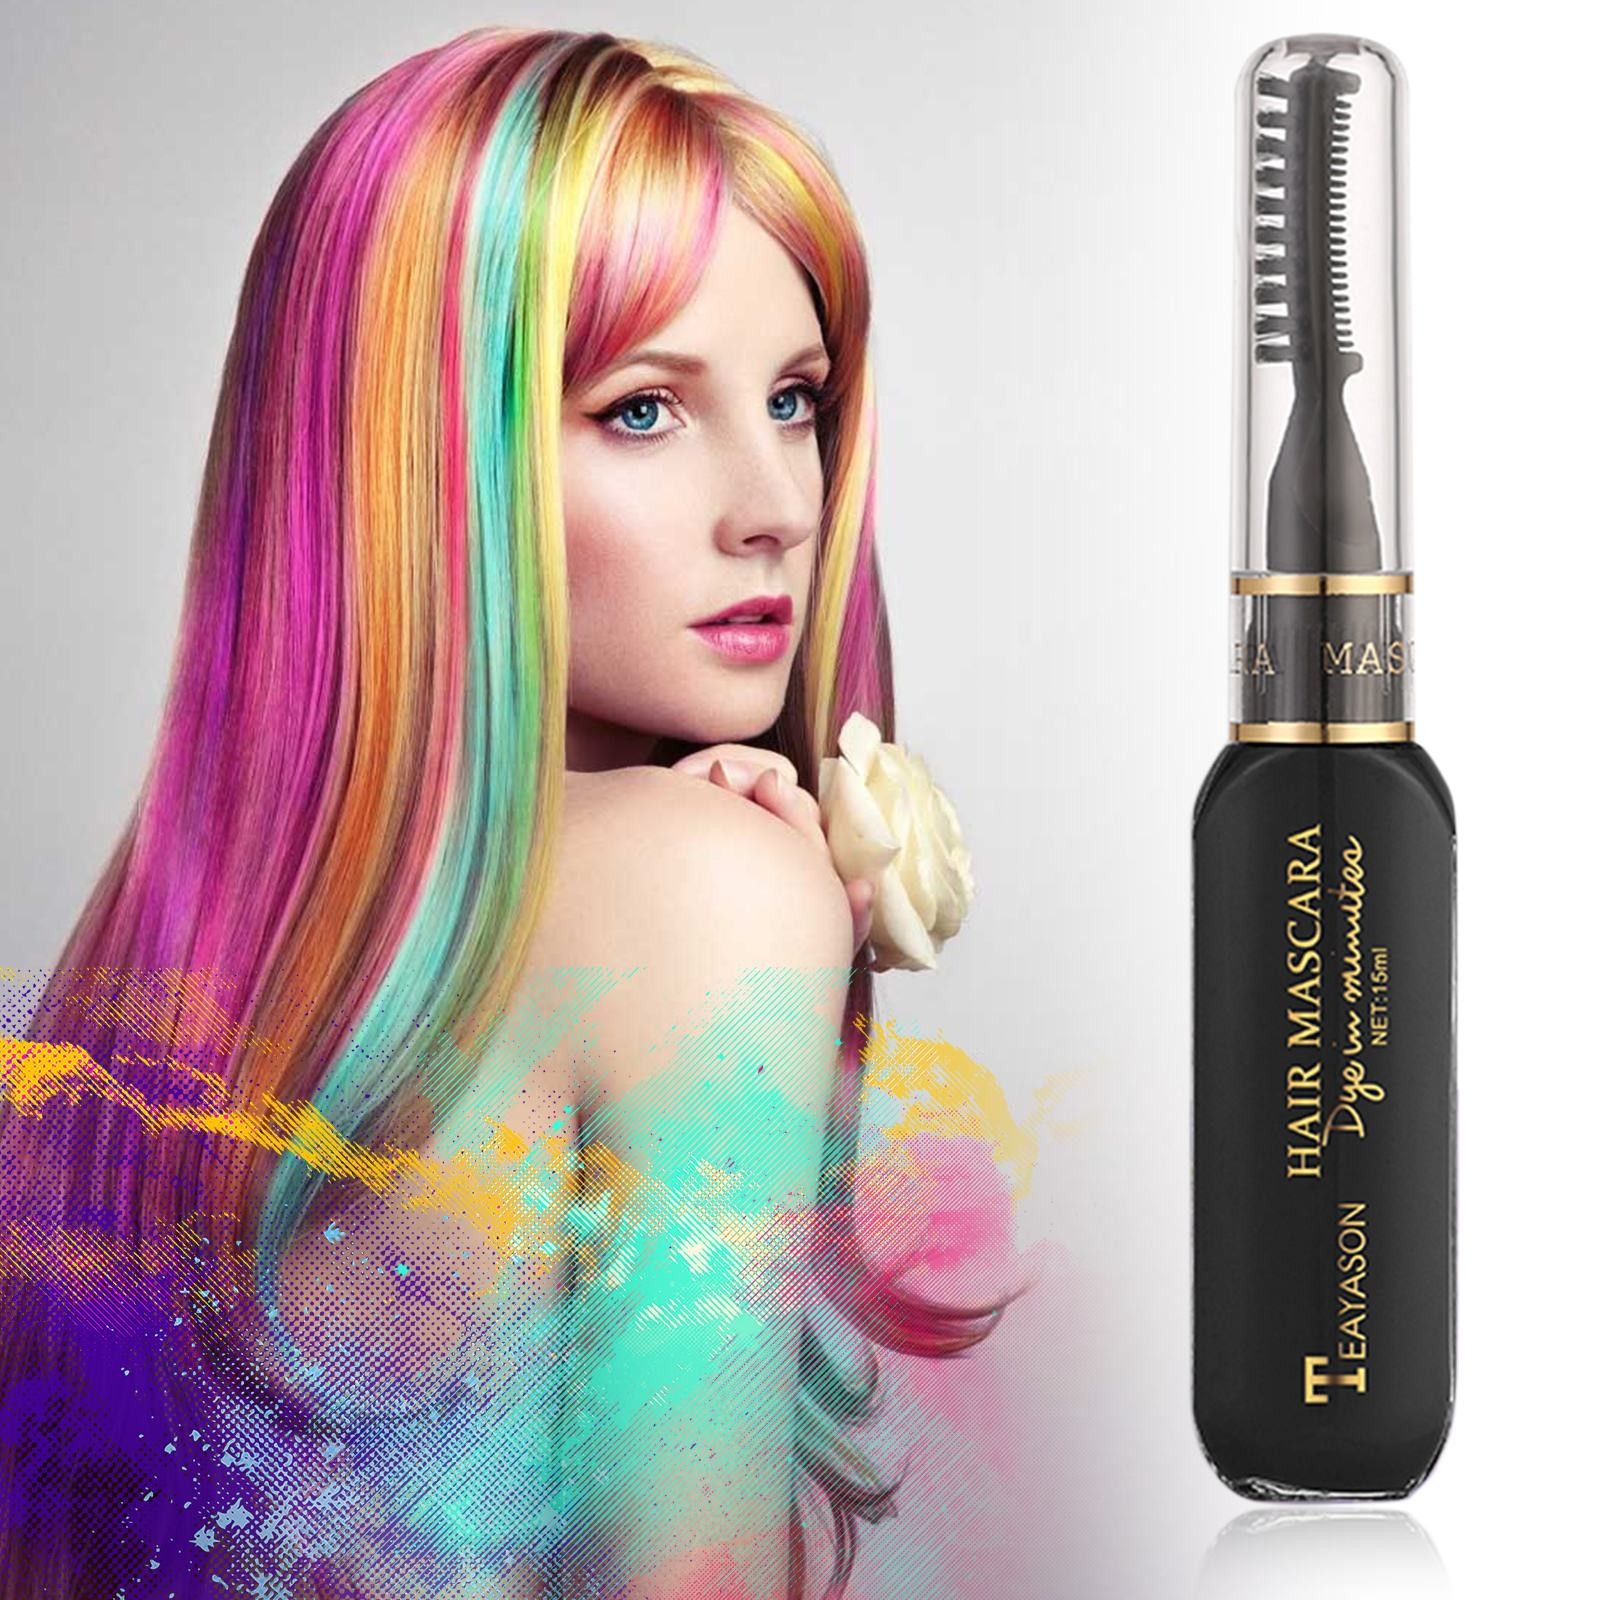 HSMQHJWE 4c Hair Care Kit Disposable Hair Color Temporary Hair Color Chalk Comb Set Women Instant Hair Color Highlight Stripe Color Mascara Hair Chalk For Birthday Party 3ml And Travel Kit - image 4 of 5